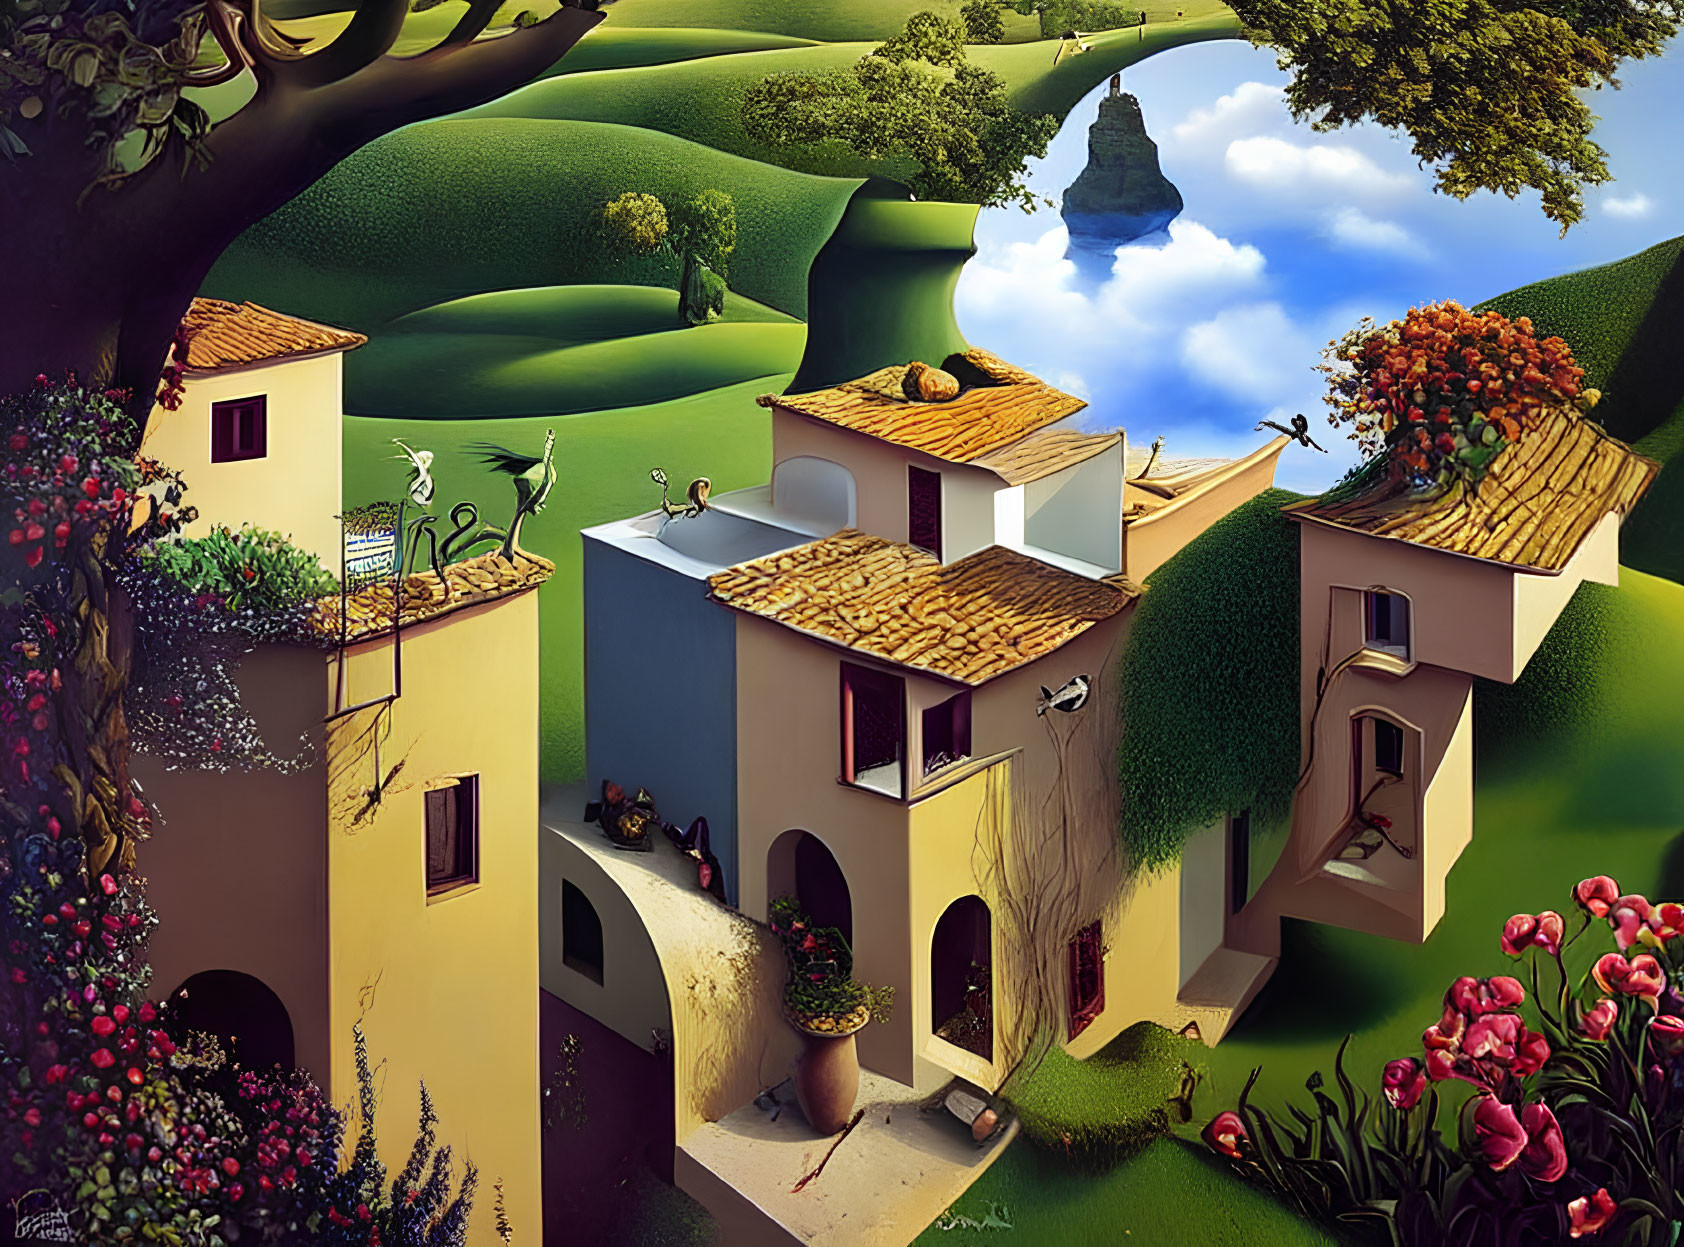 Whimsical houses amidst green hills and vibrant flora